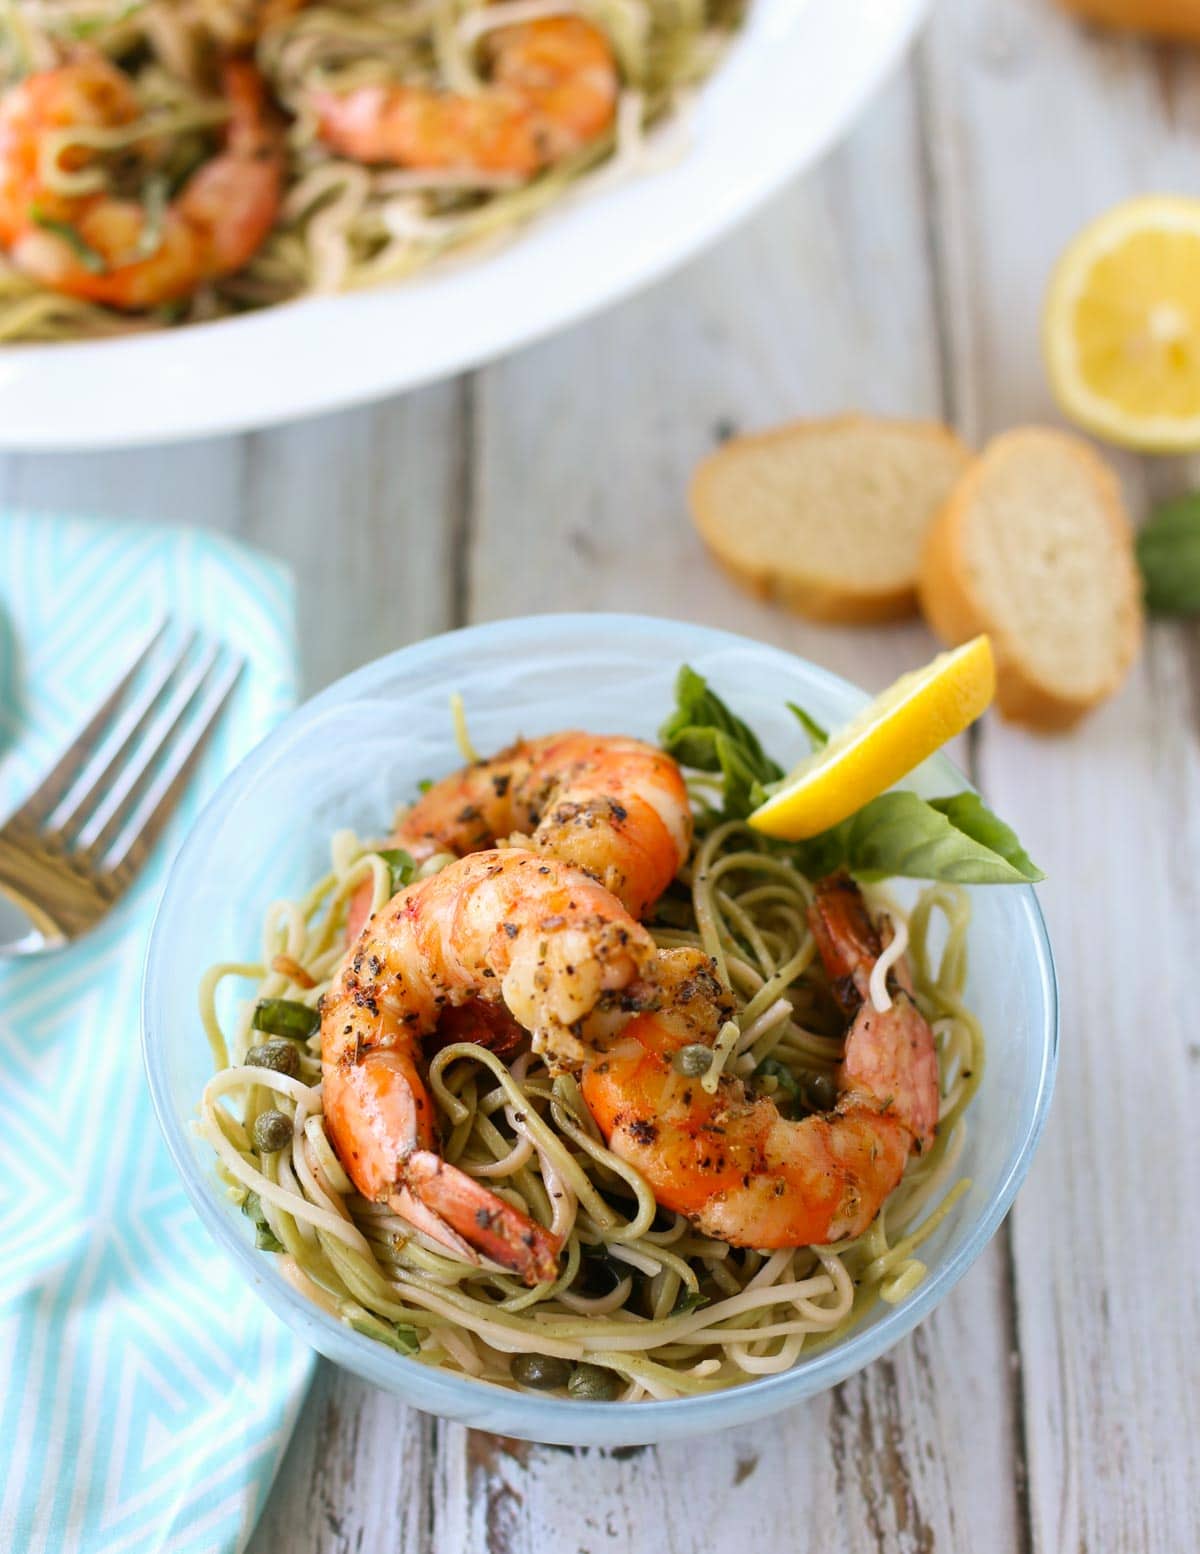 Creole Shrimp with Lemon Basil Pasta | Delicious Creole Spicy Shrimp atop a tangy lemon pasta, a perfect blend of flavors and textures! Serve for dinner at the beach or any poolside gathering. A wonderful simple treat for all! Yum! | WorldofPastabilities.com